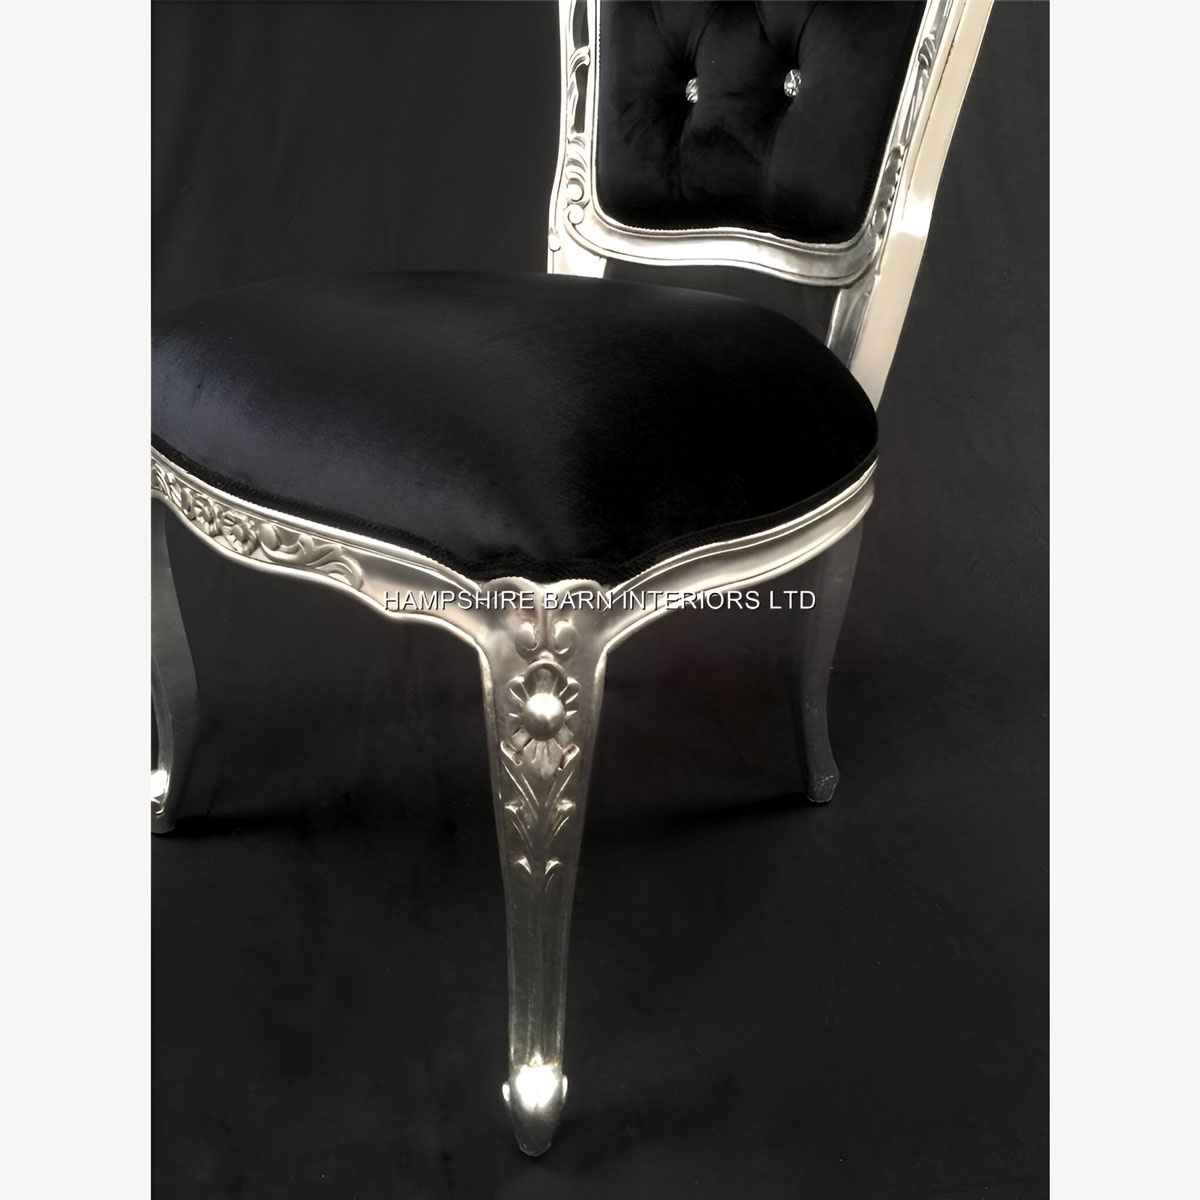 Franciscan Chair In Silver Leaf Black Velvet And Crystals Dining Or Occasional 2 - Hampshire Barn Interiors - Franciscan Chair In Silver Leaf Black Velvet And Crystals (Dining Or Occasional) -